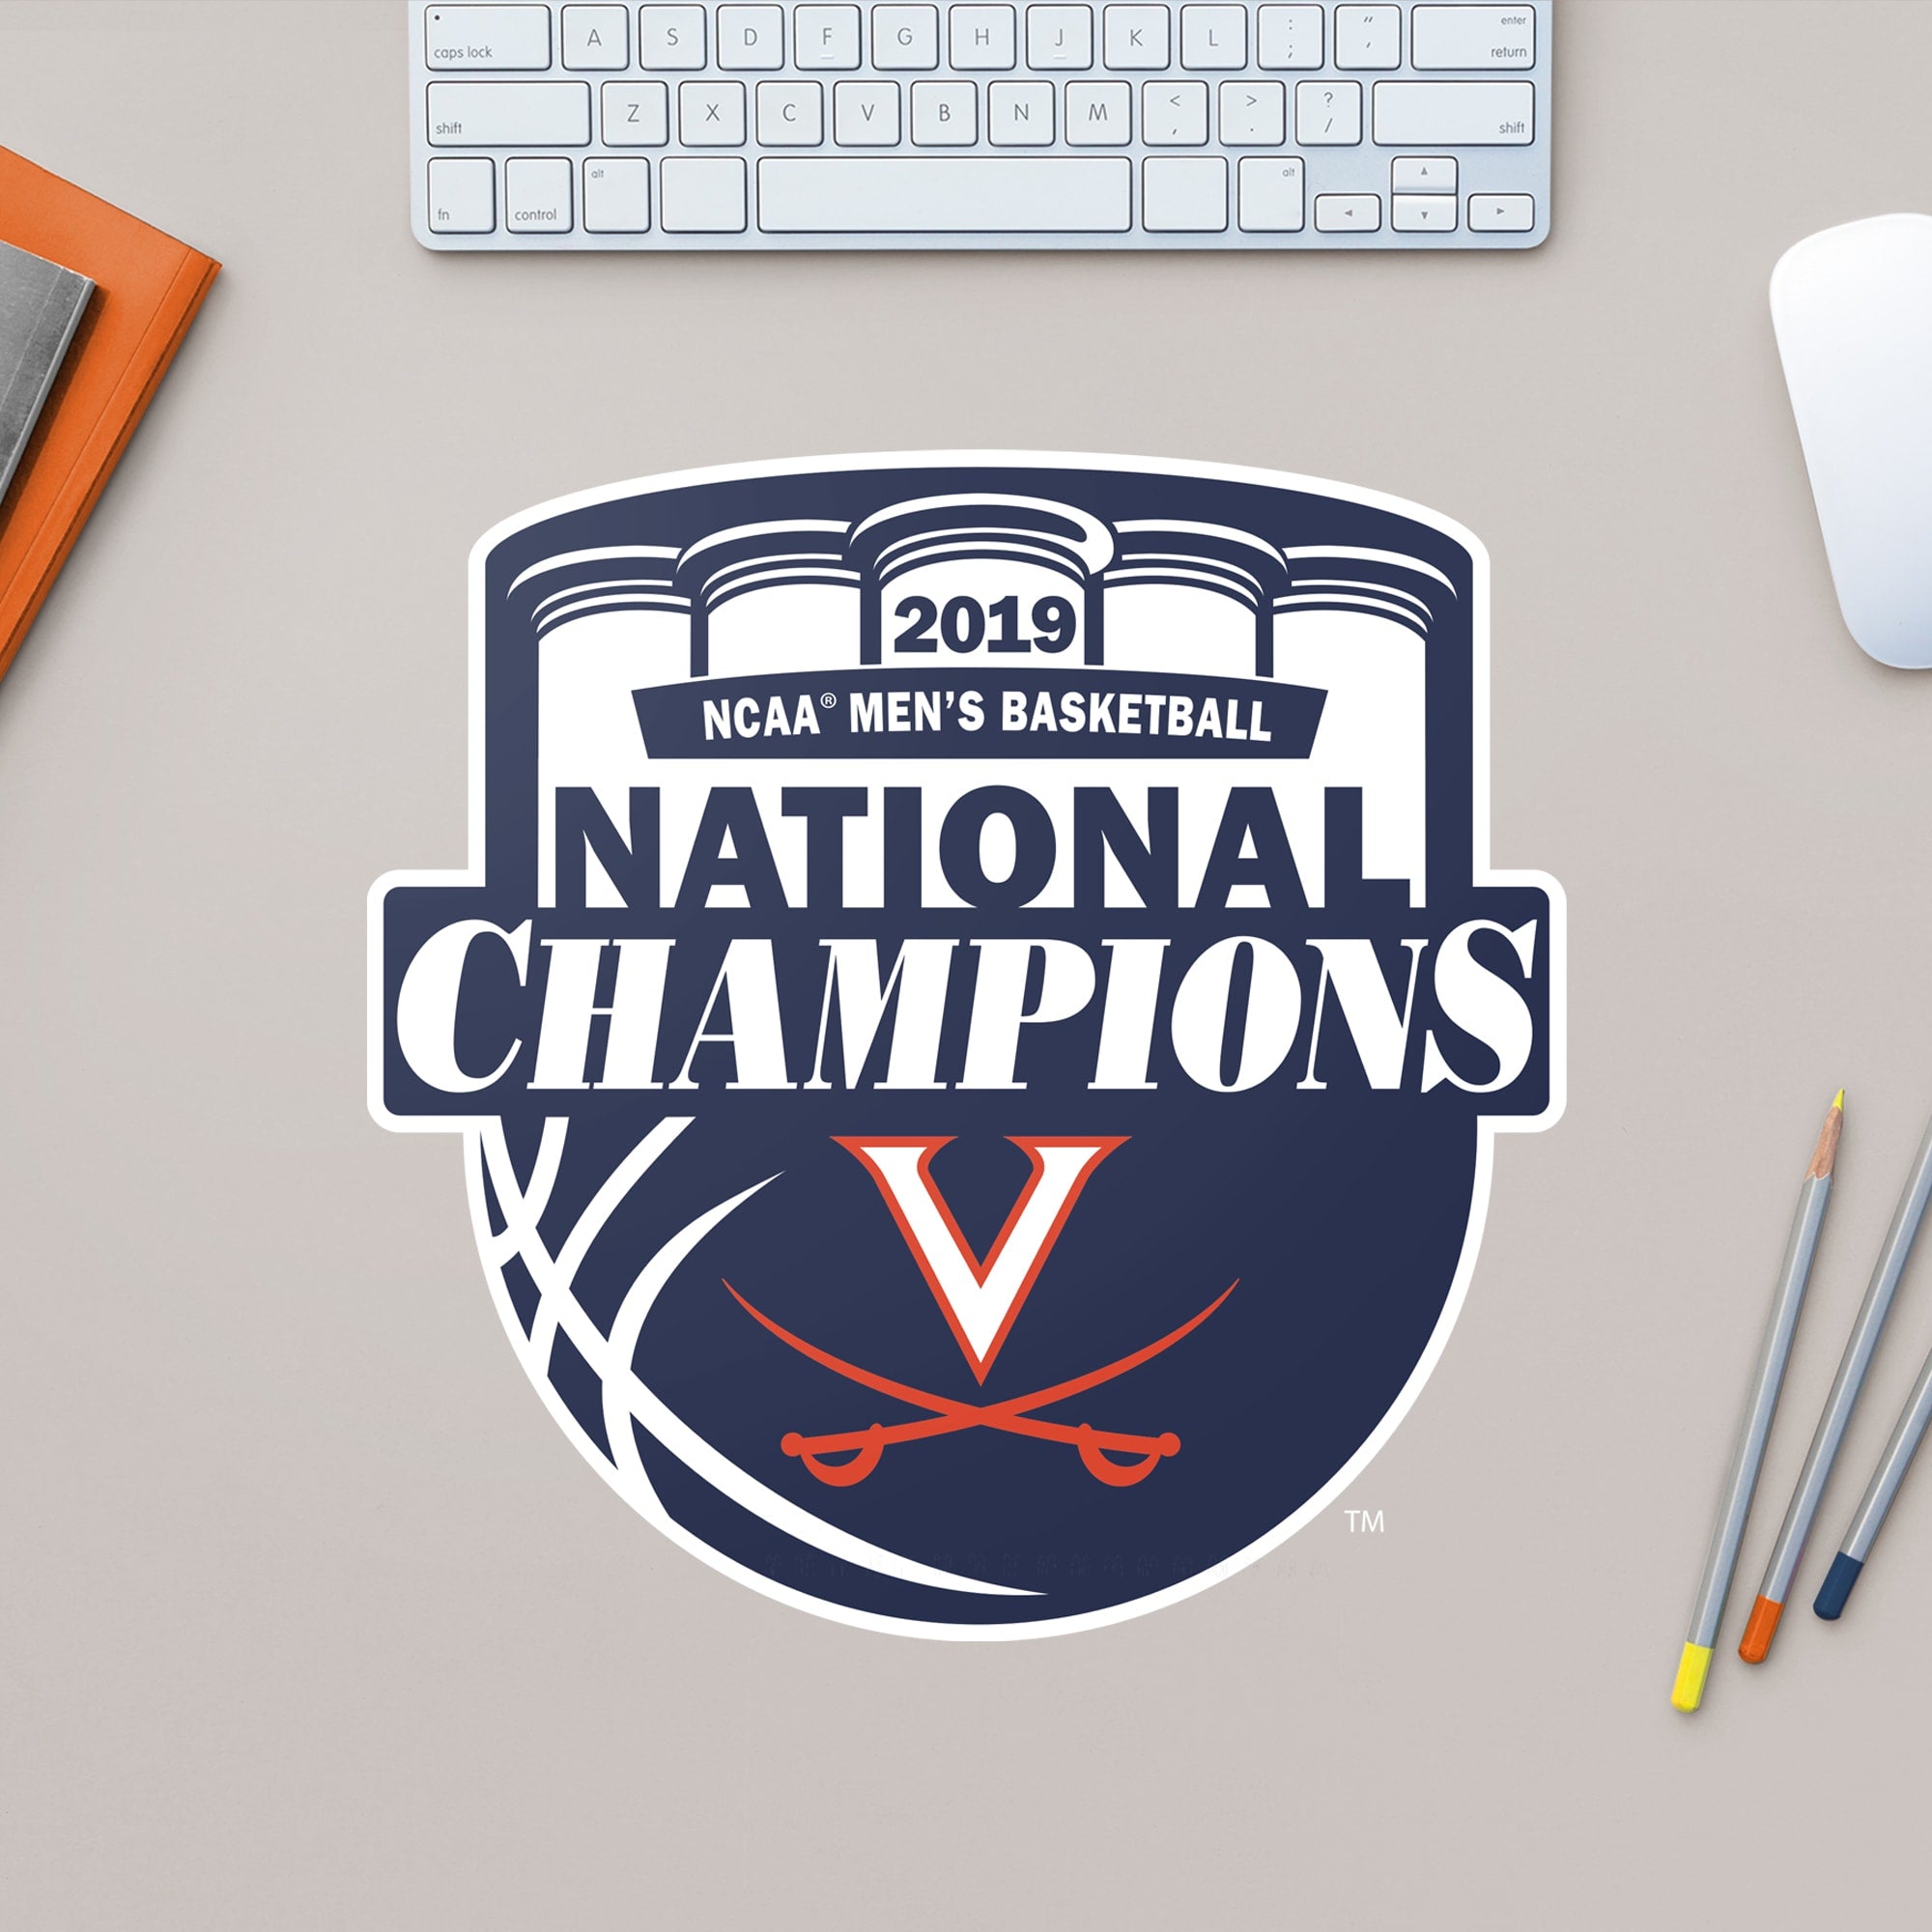 Virginia Cavaliers: 2019 Mens Basketball National Champions Logo - Officially Licensed Removable Wall Decal Large by Fathead |